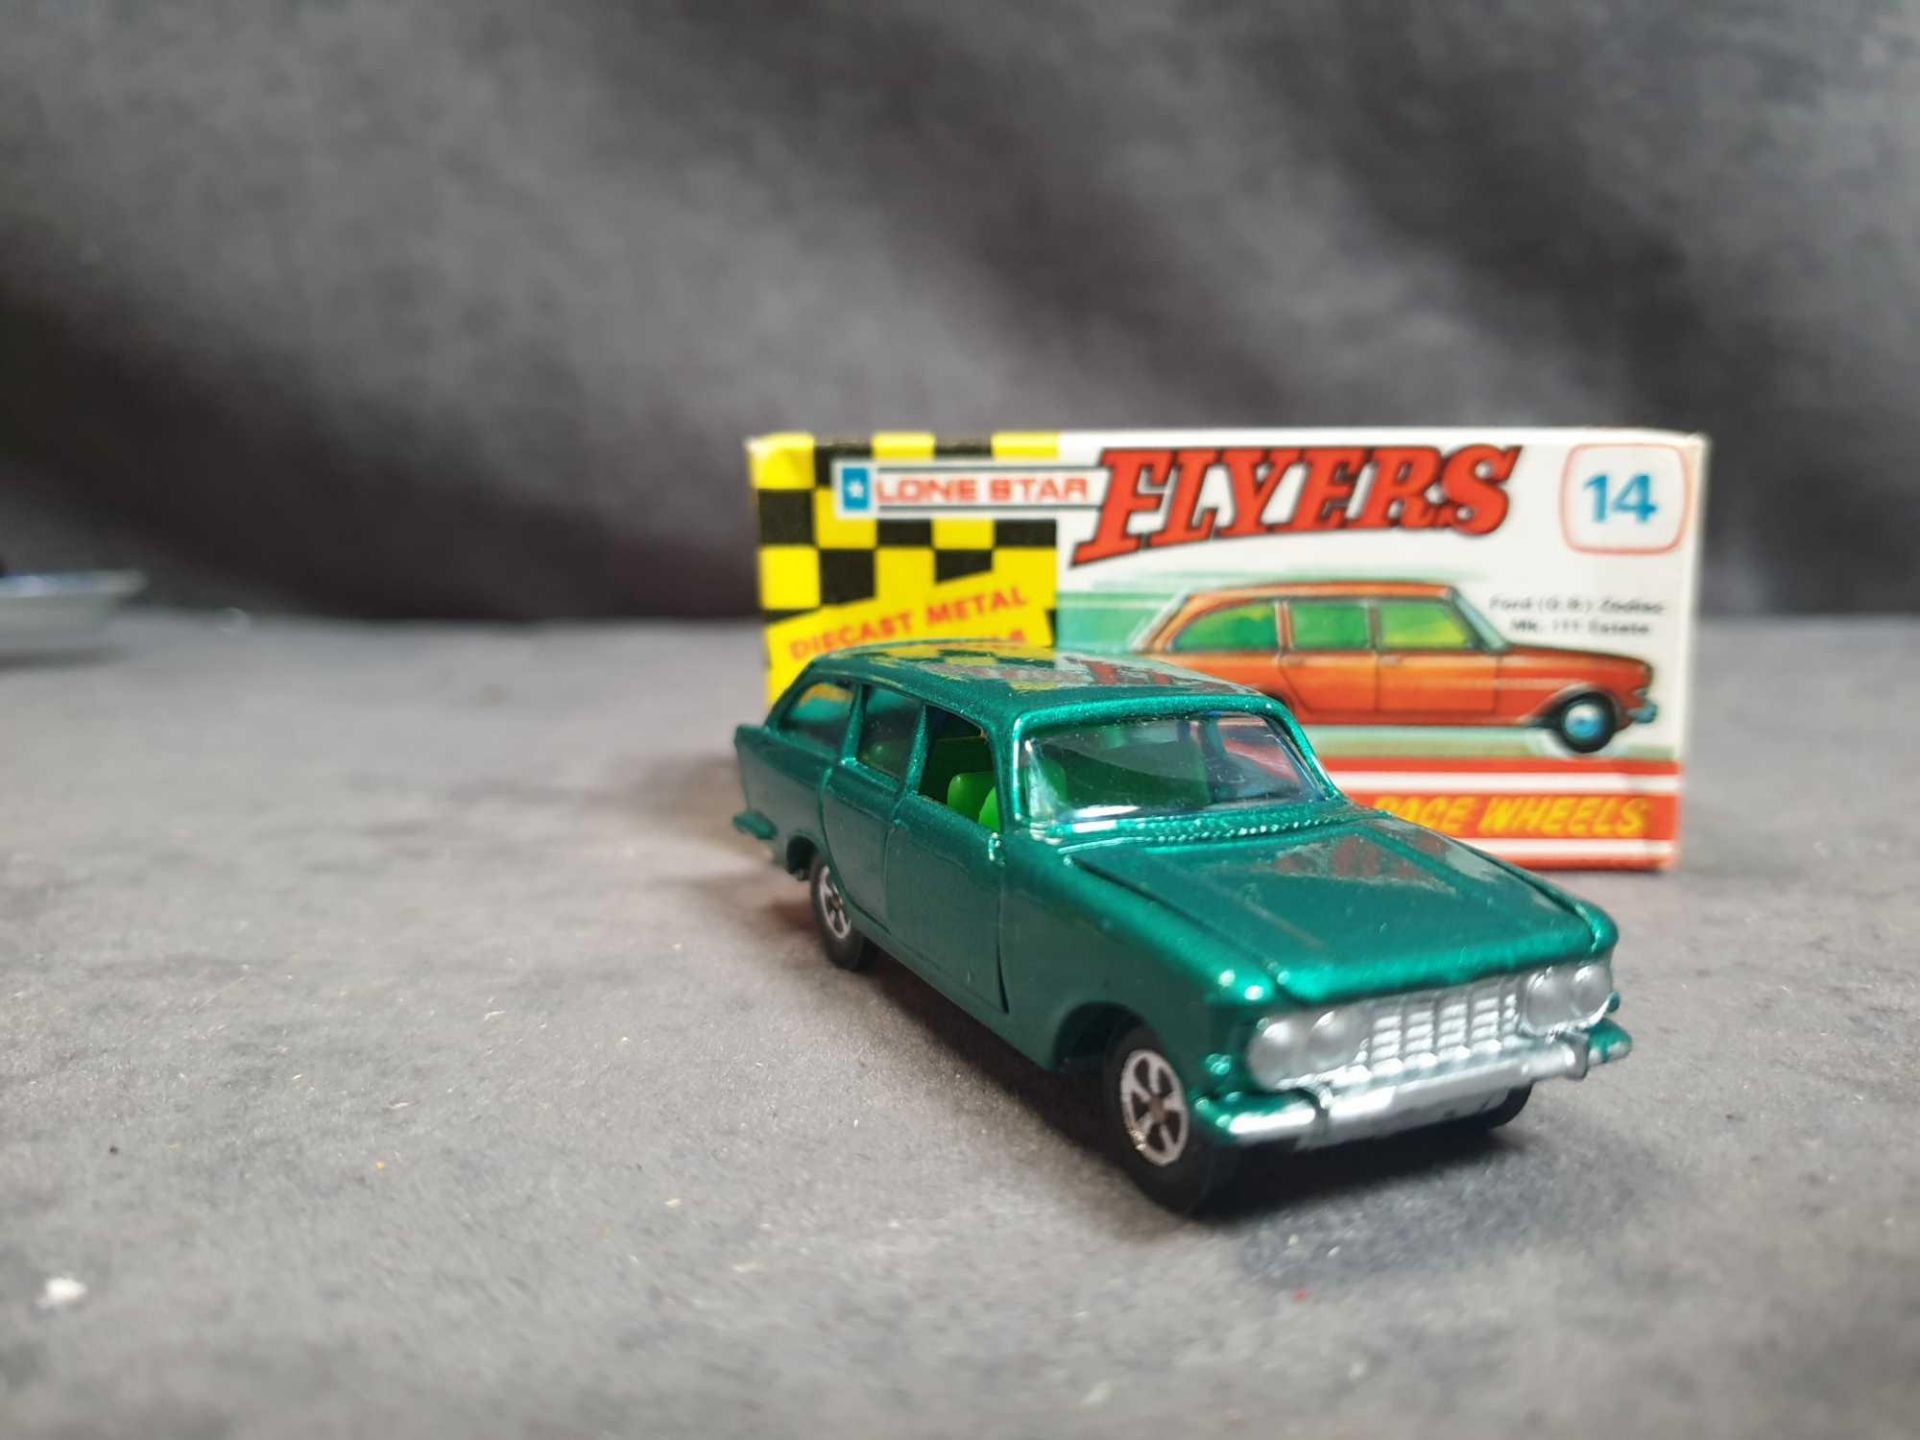 Mint Lone Star #111 Road Masters Flyers 14 Super Cars Ford Zodiak Estate Green Rare Green Windows - Image 3 of 3